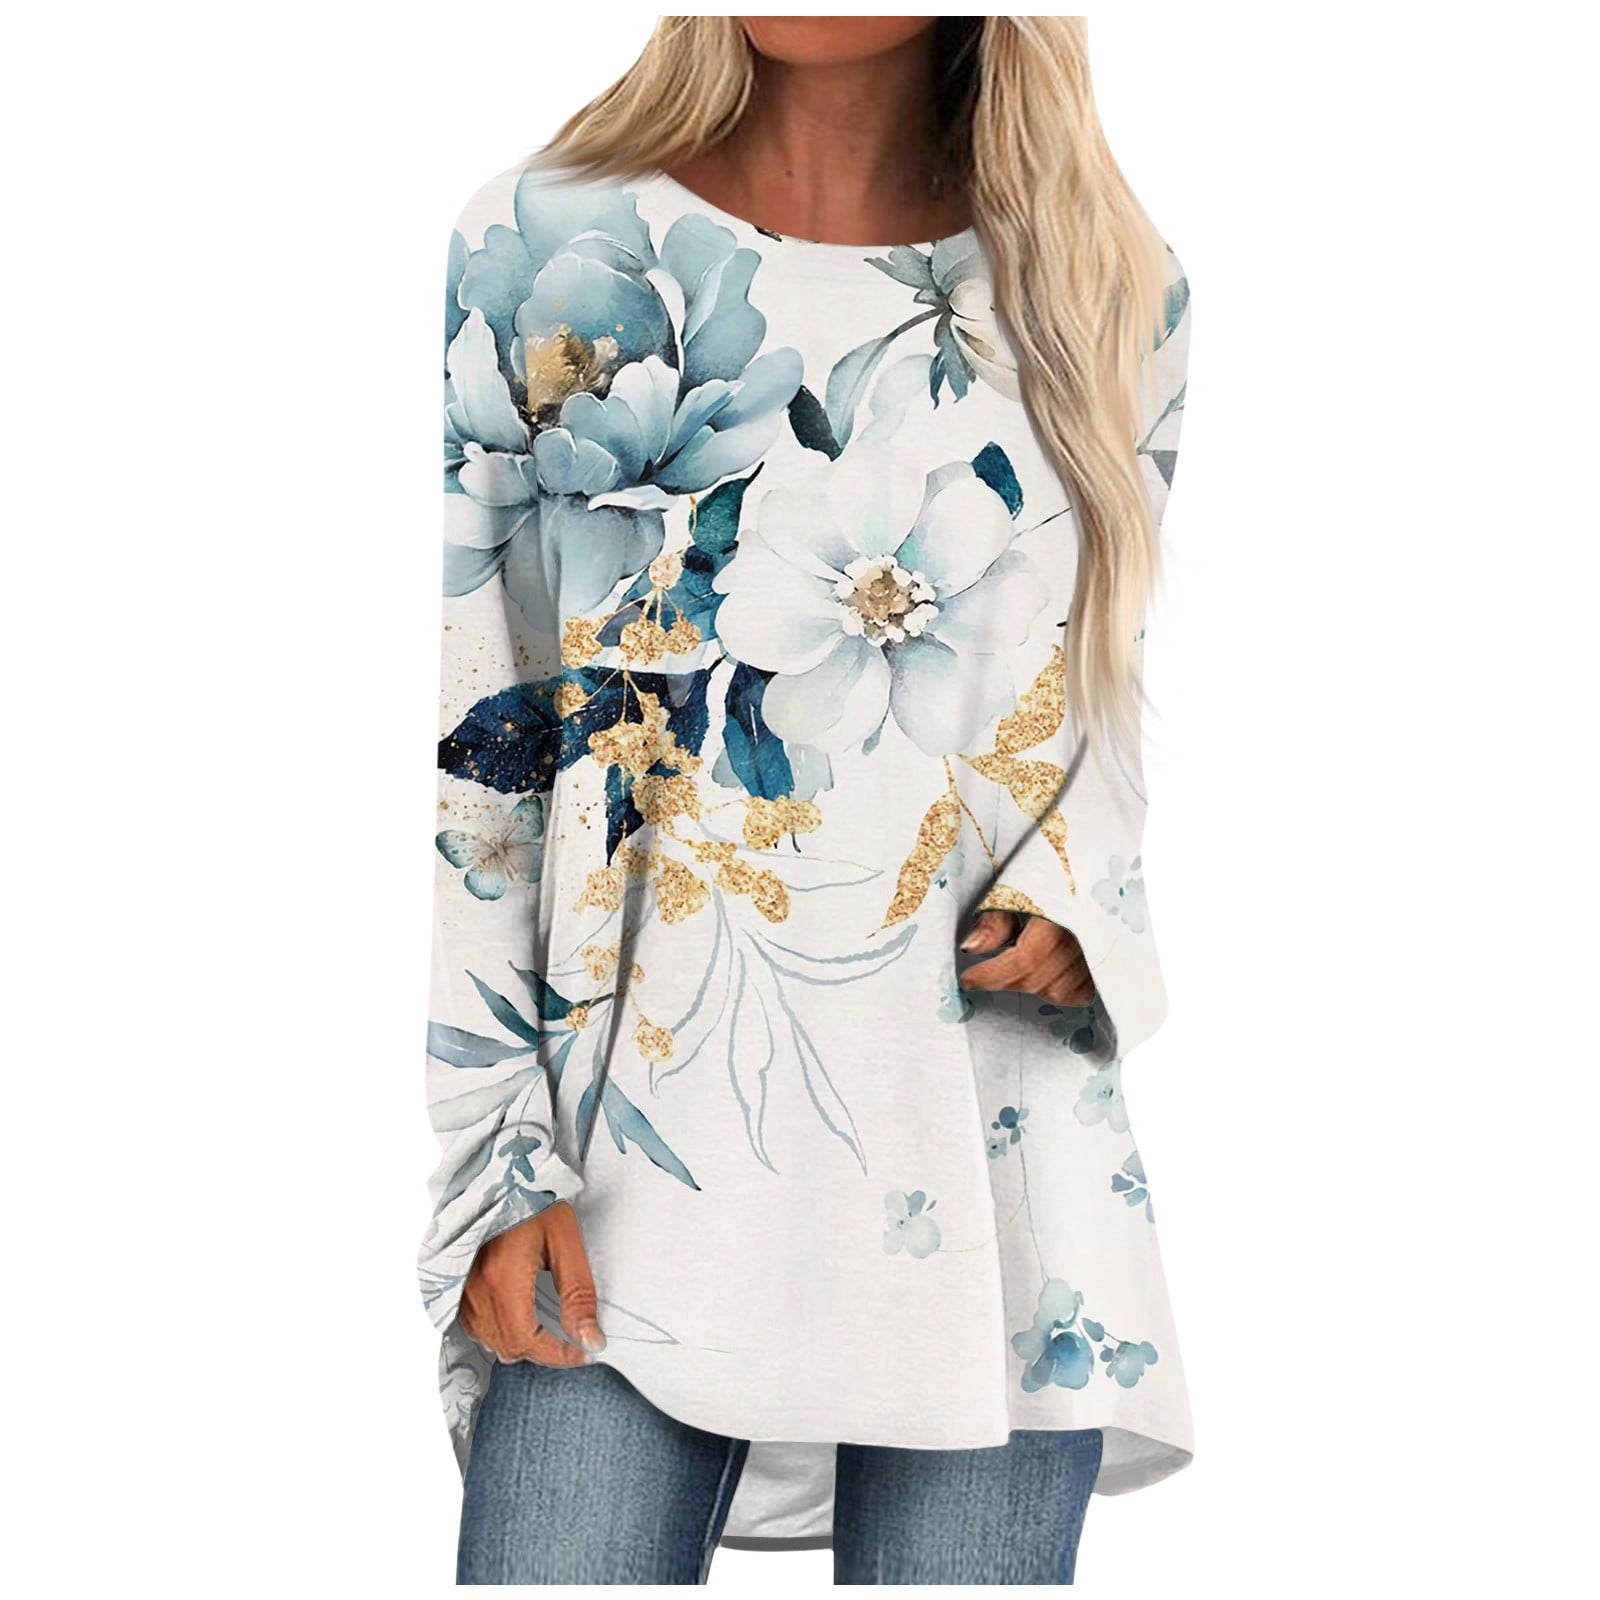 Sweatshirt for Women Crewneck Tunic Tops to Wear with Leggings Lightblue L  deals of the day,free items under 1 dollar,t shirts bulk,bulk tshirt,flash  deals,warehouse sale clearance at  Women's Clothing store